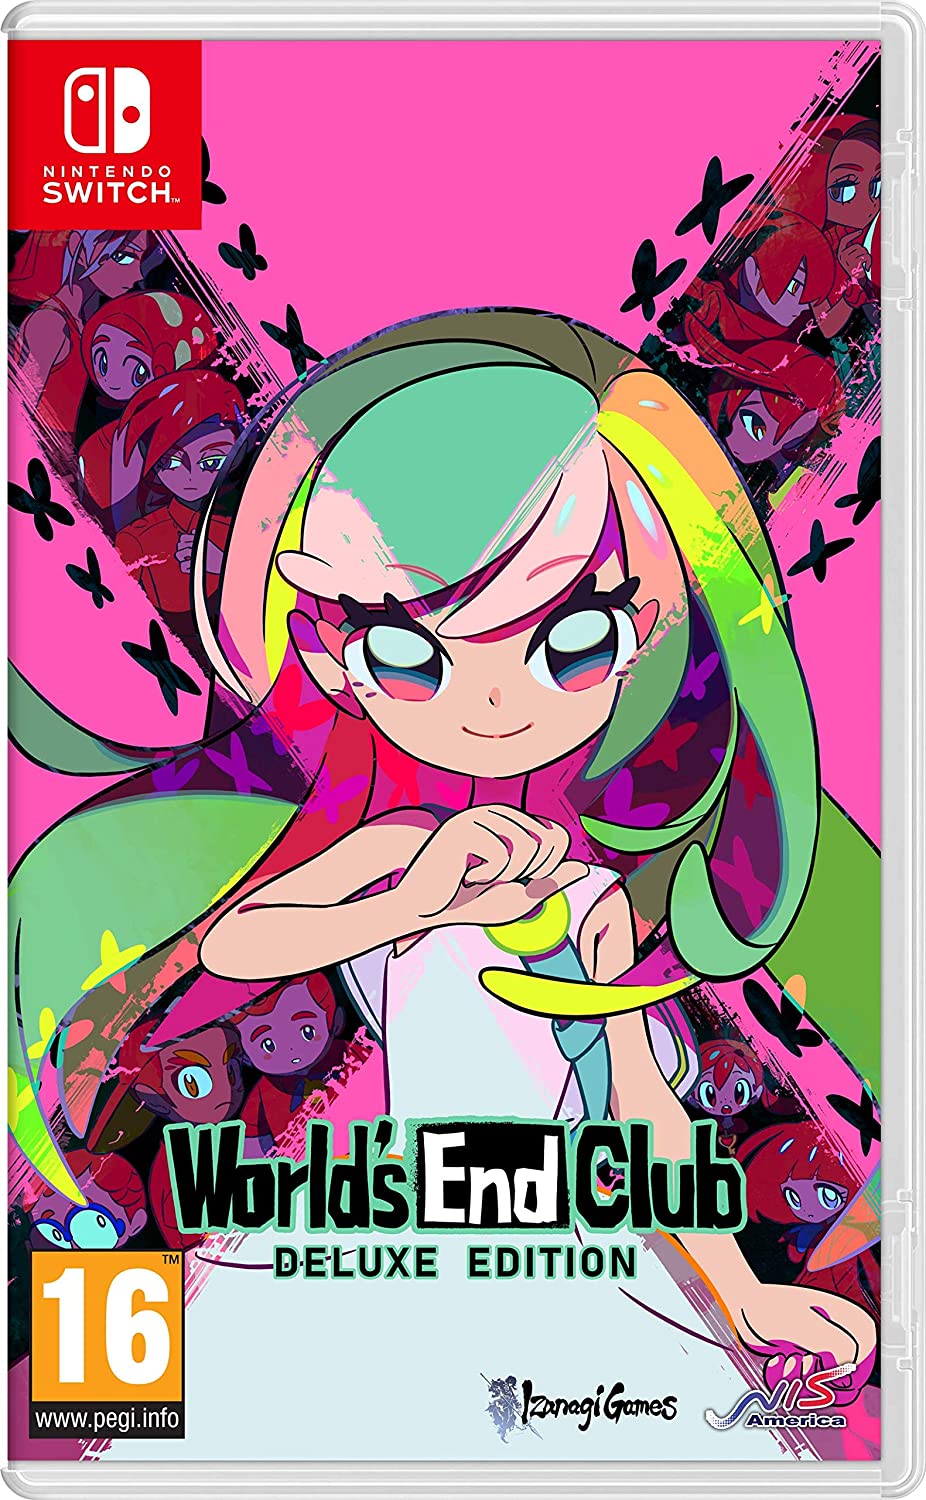 Nis World's End Club Deluxe Edition